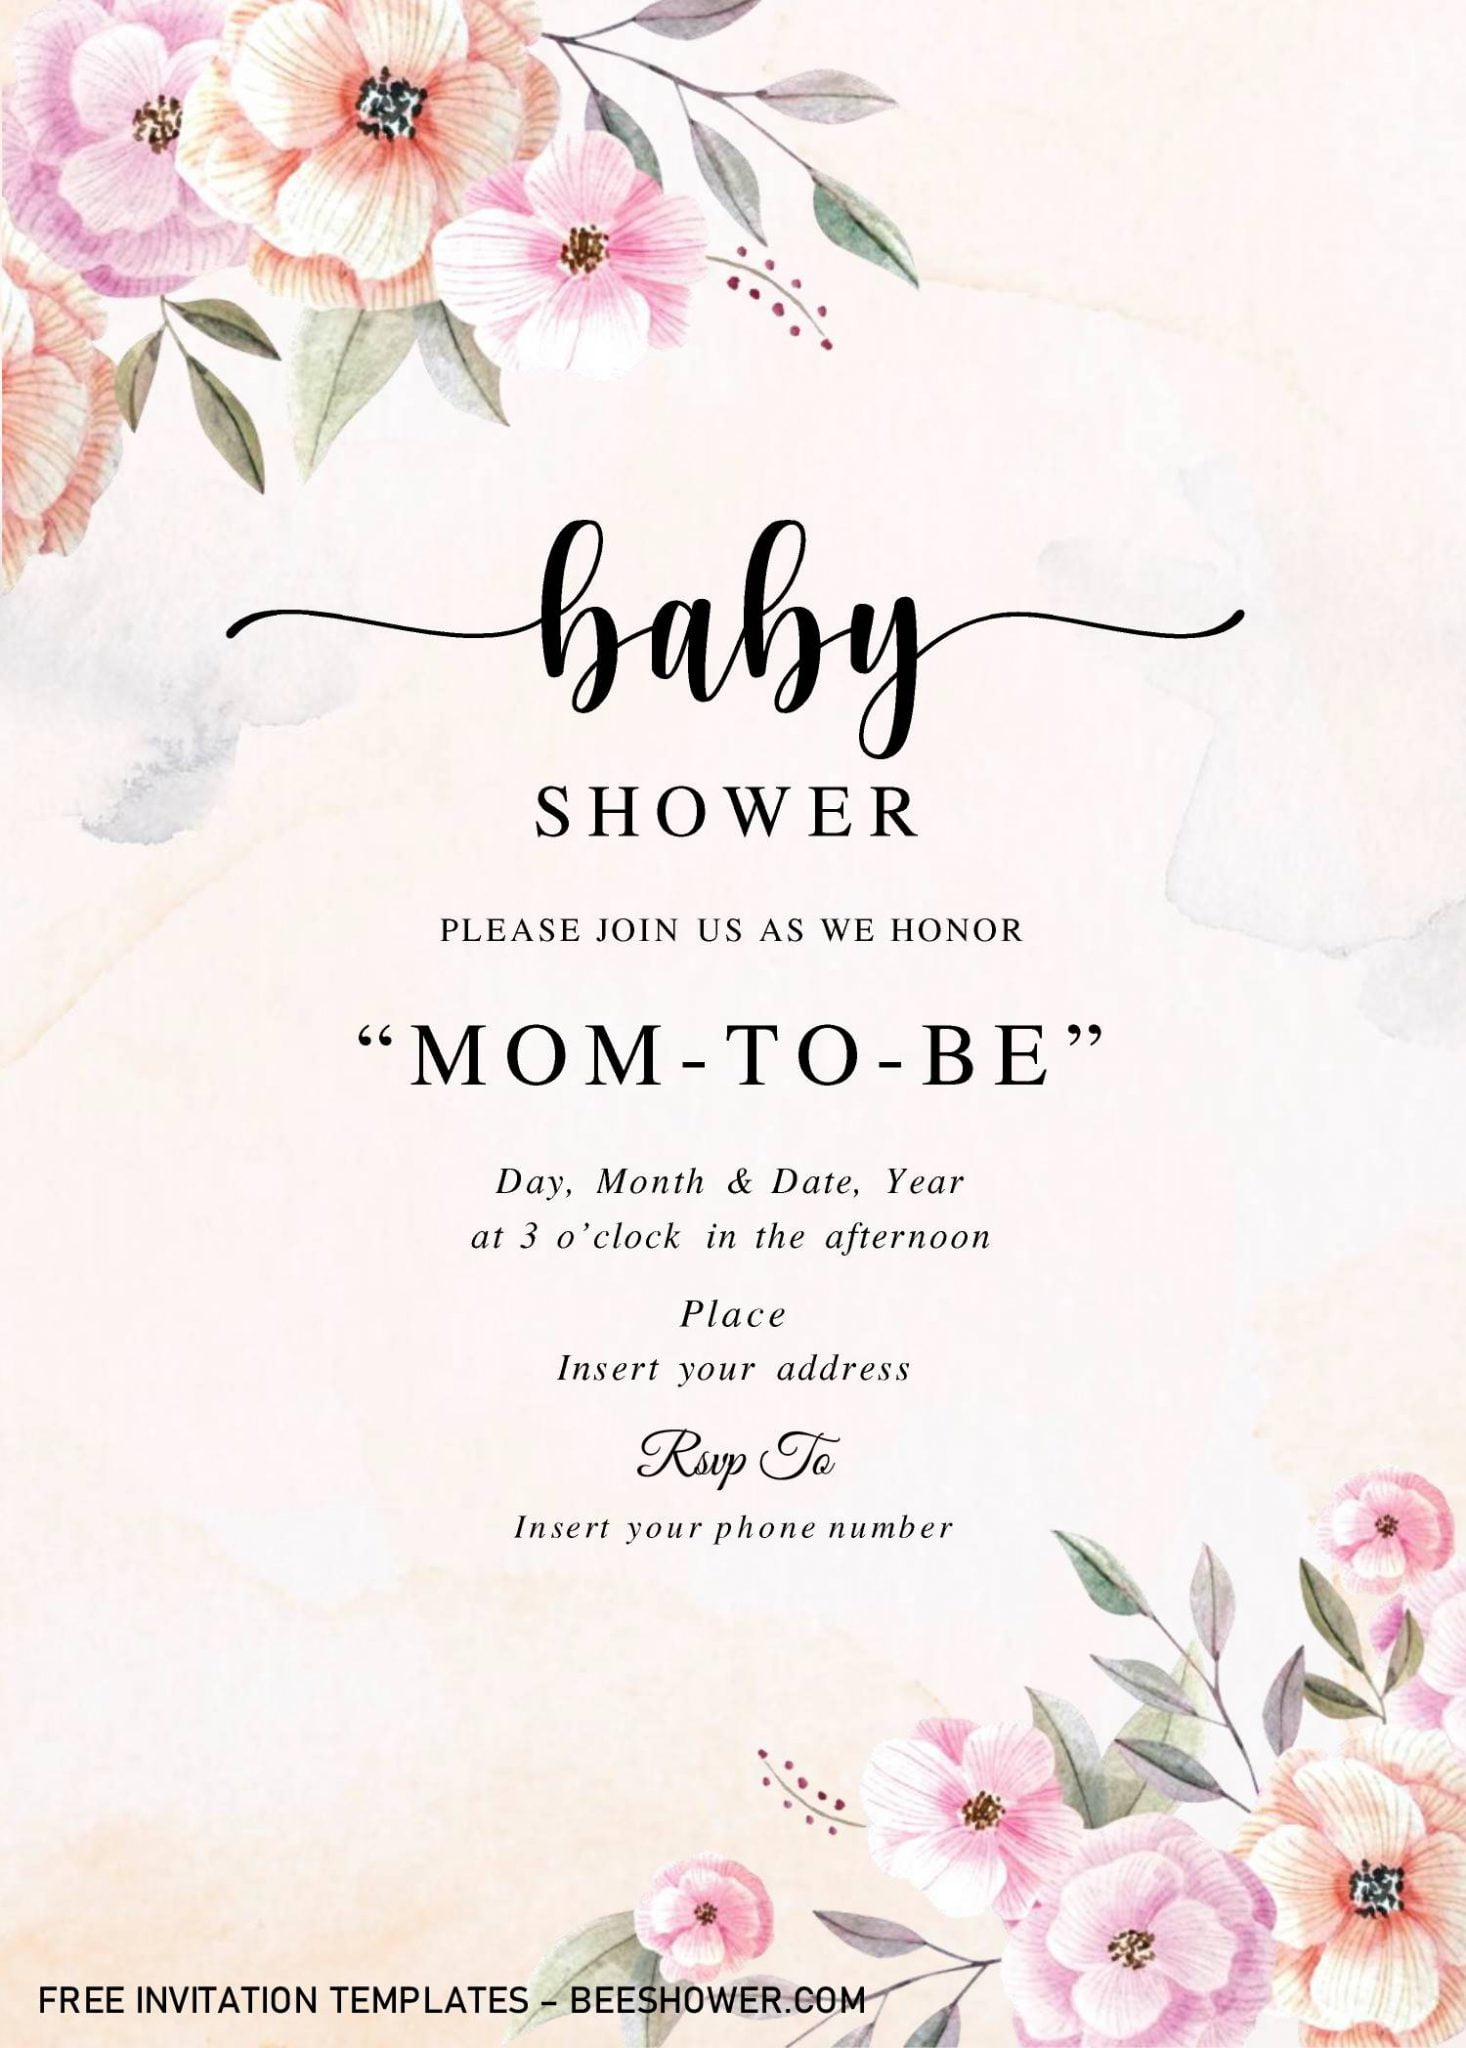 rustic-floral-baby-shower-invitation-templates-editable-with